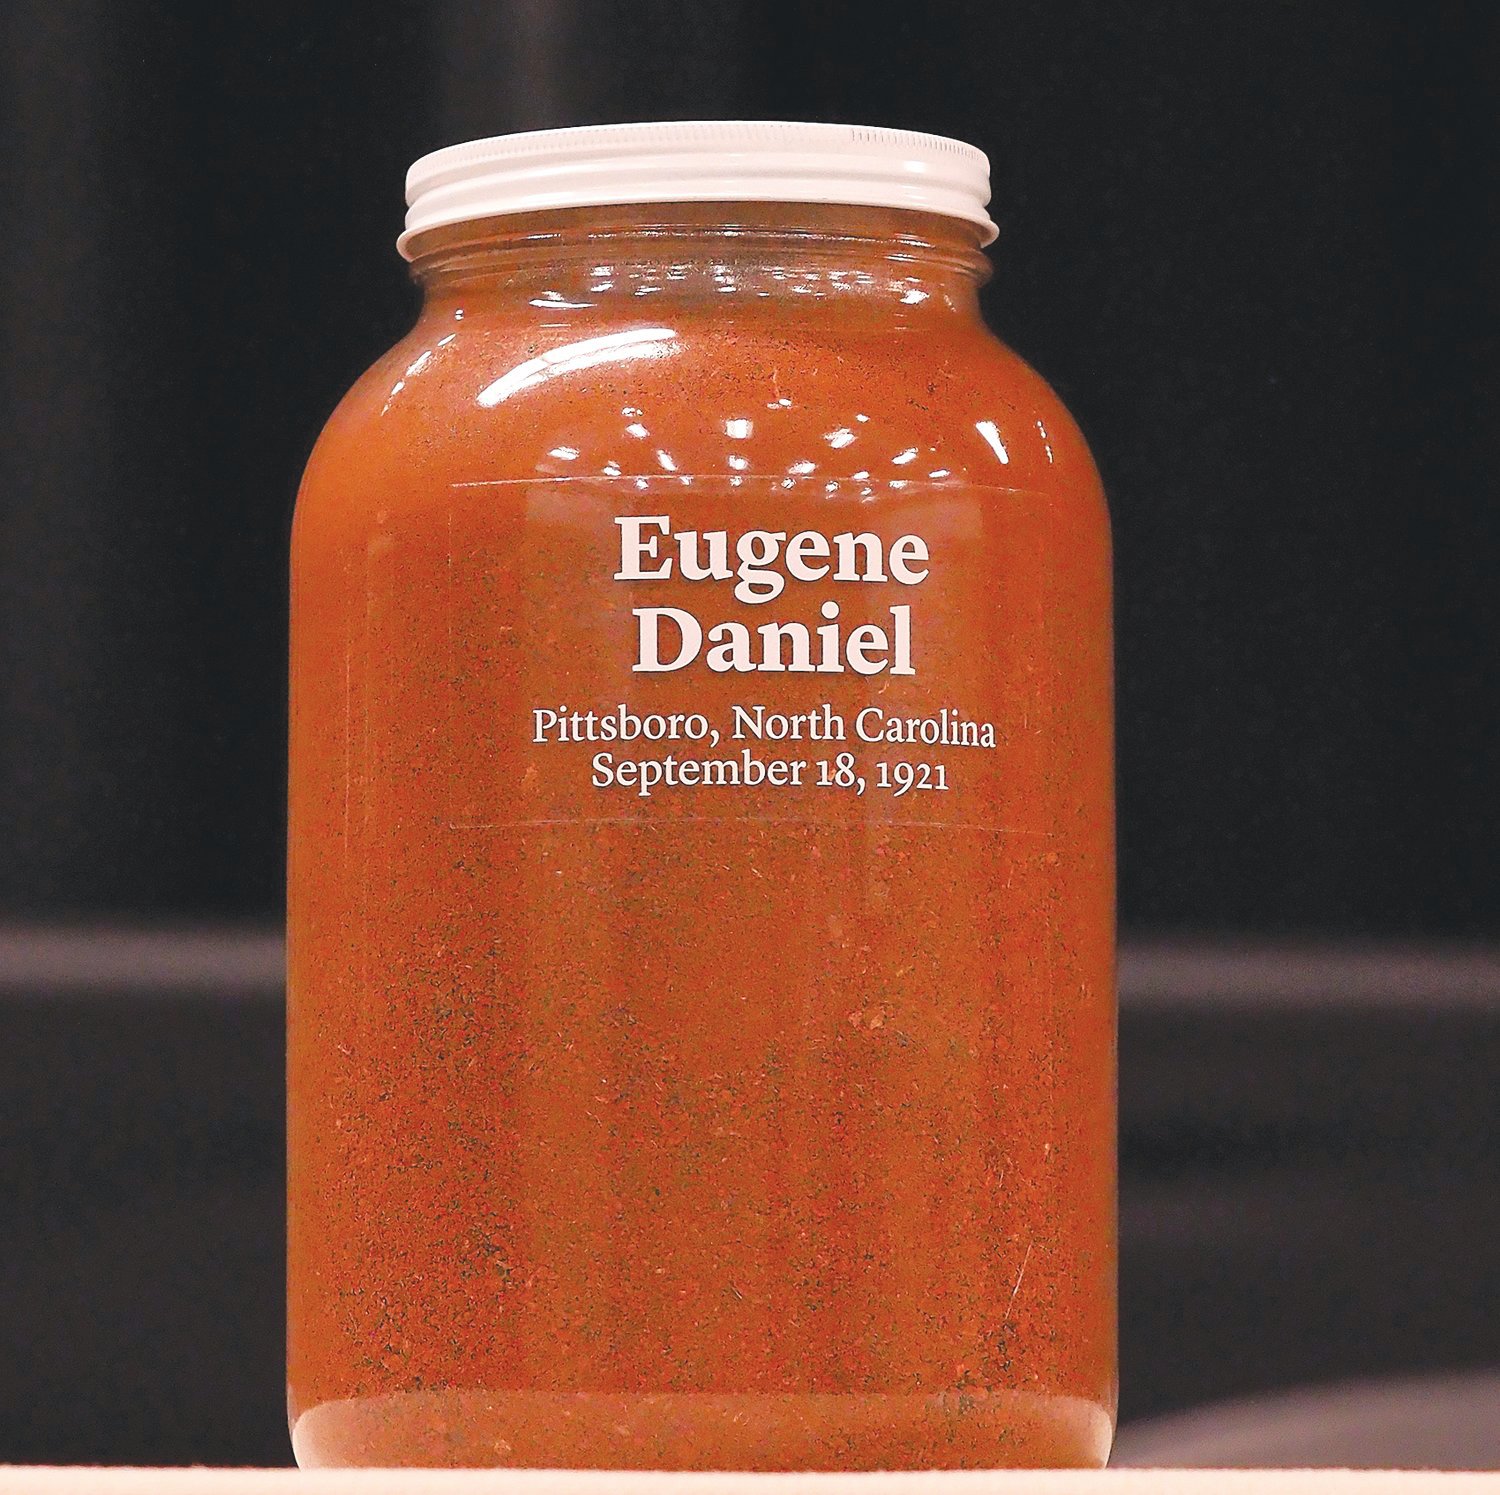 This jar of soil, from Eugene Daniel's lynching site, is now on display at the Equal Justice Initiative's Legacy Museum in Montgomery, Alabama. Another soil removal ceremony coincides with an event memorializing Chatham's other lynching victims on May 14.